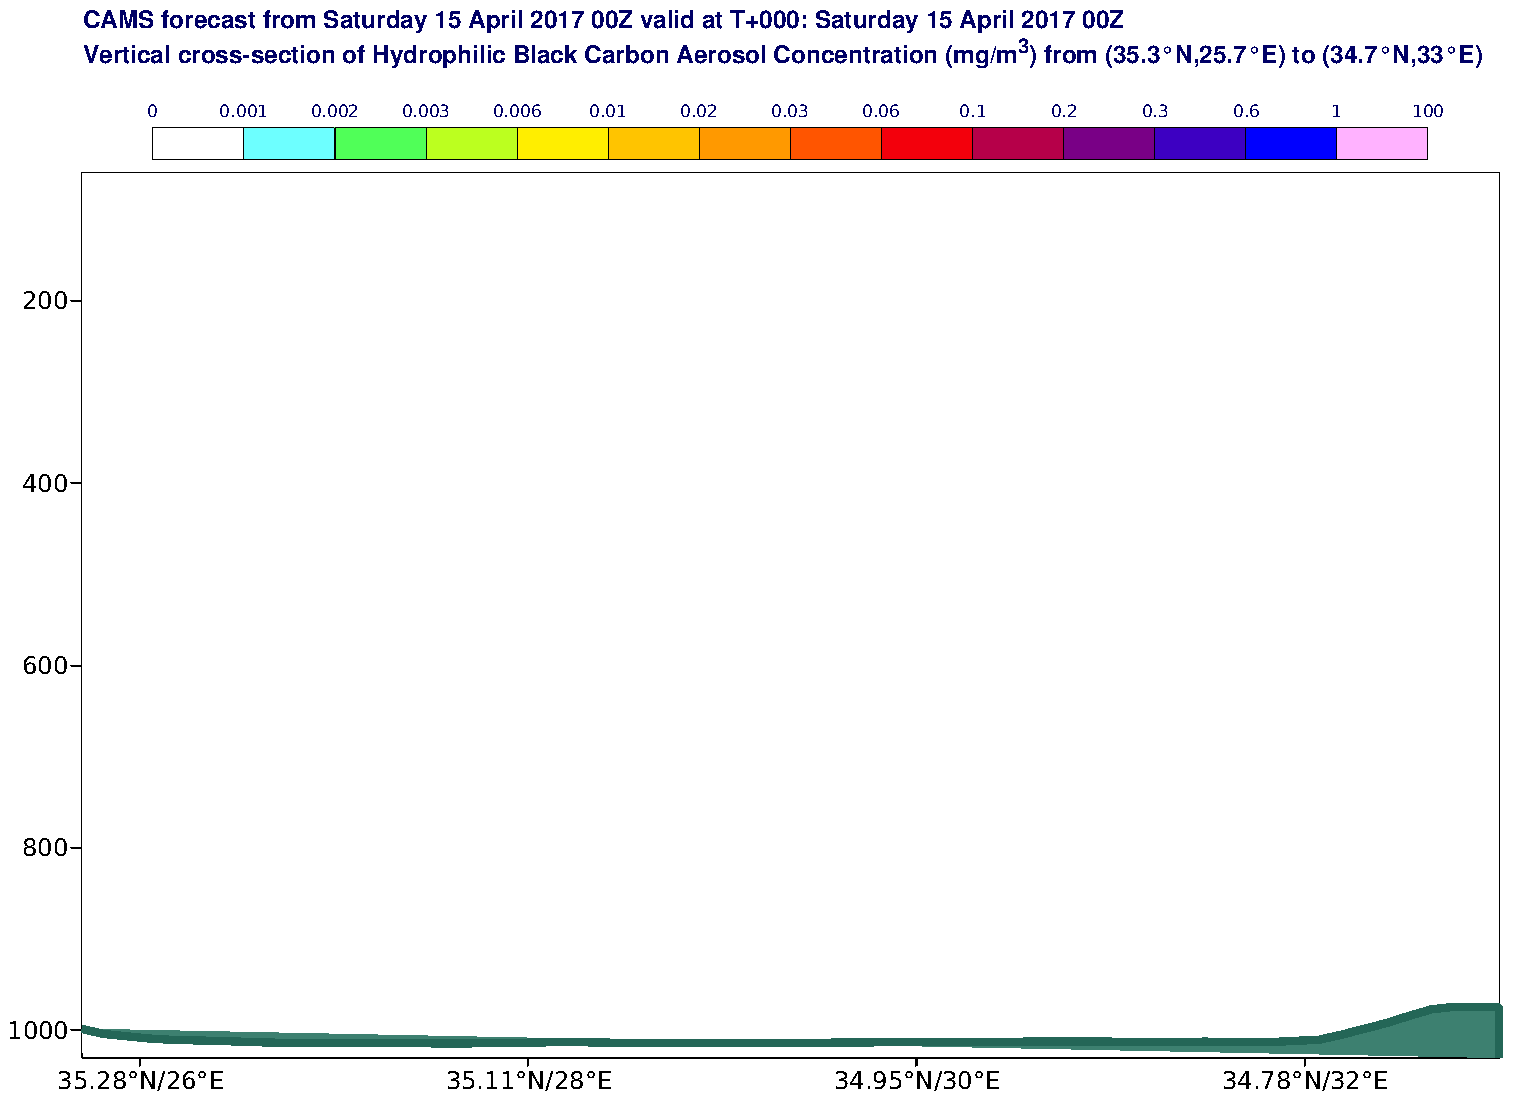 Vertical cross-section of Hydrophilic Black Carbon Aerosol Concentration (mg/m3) valid at T0 - 2017-04-15 00:00